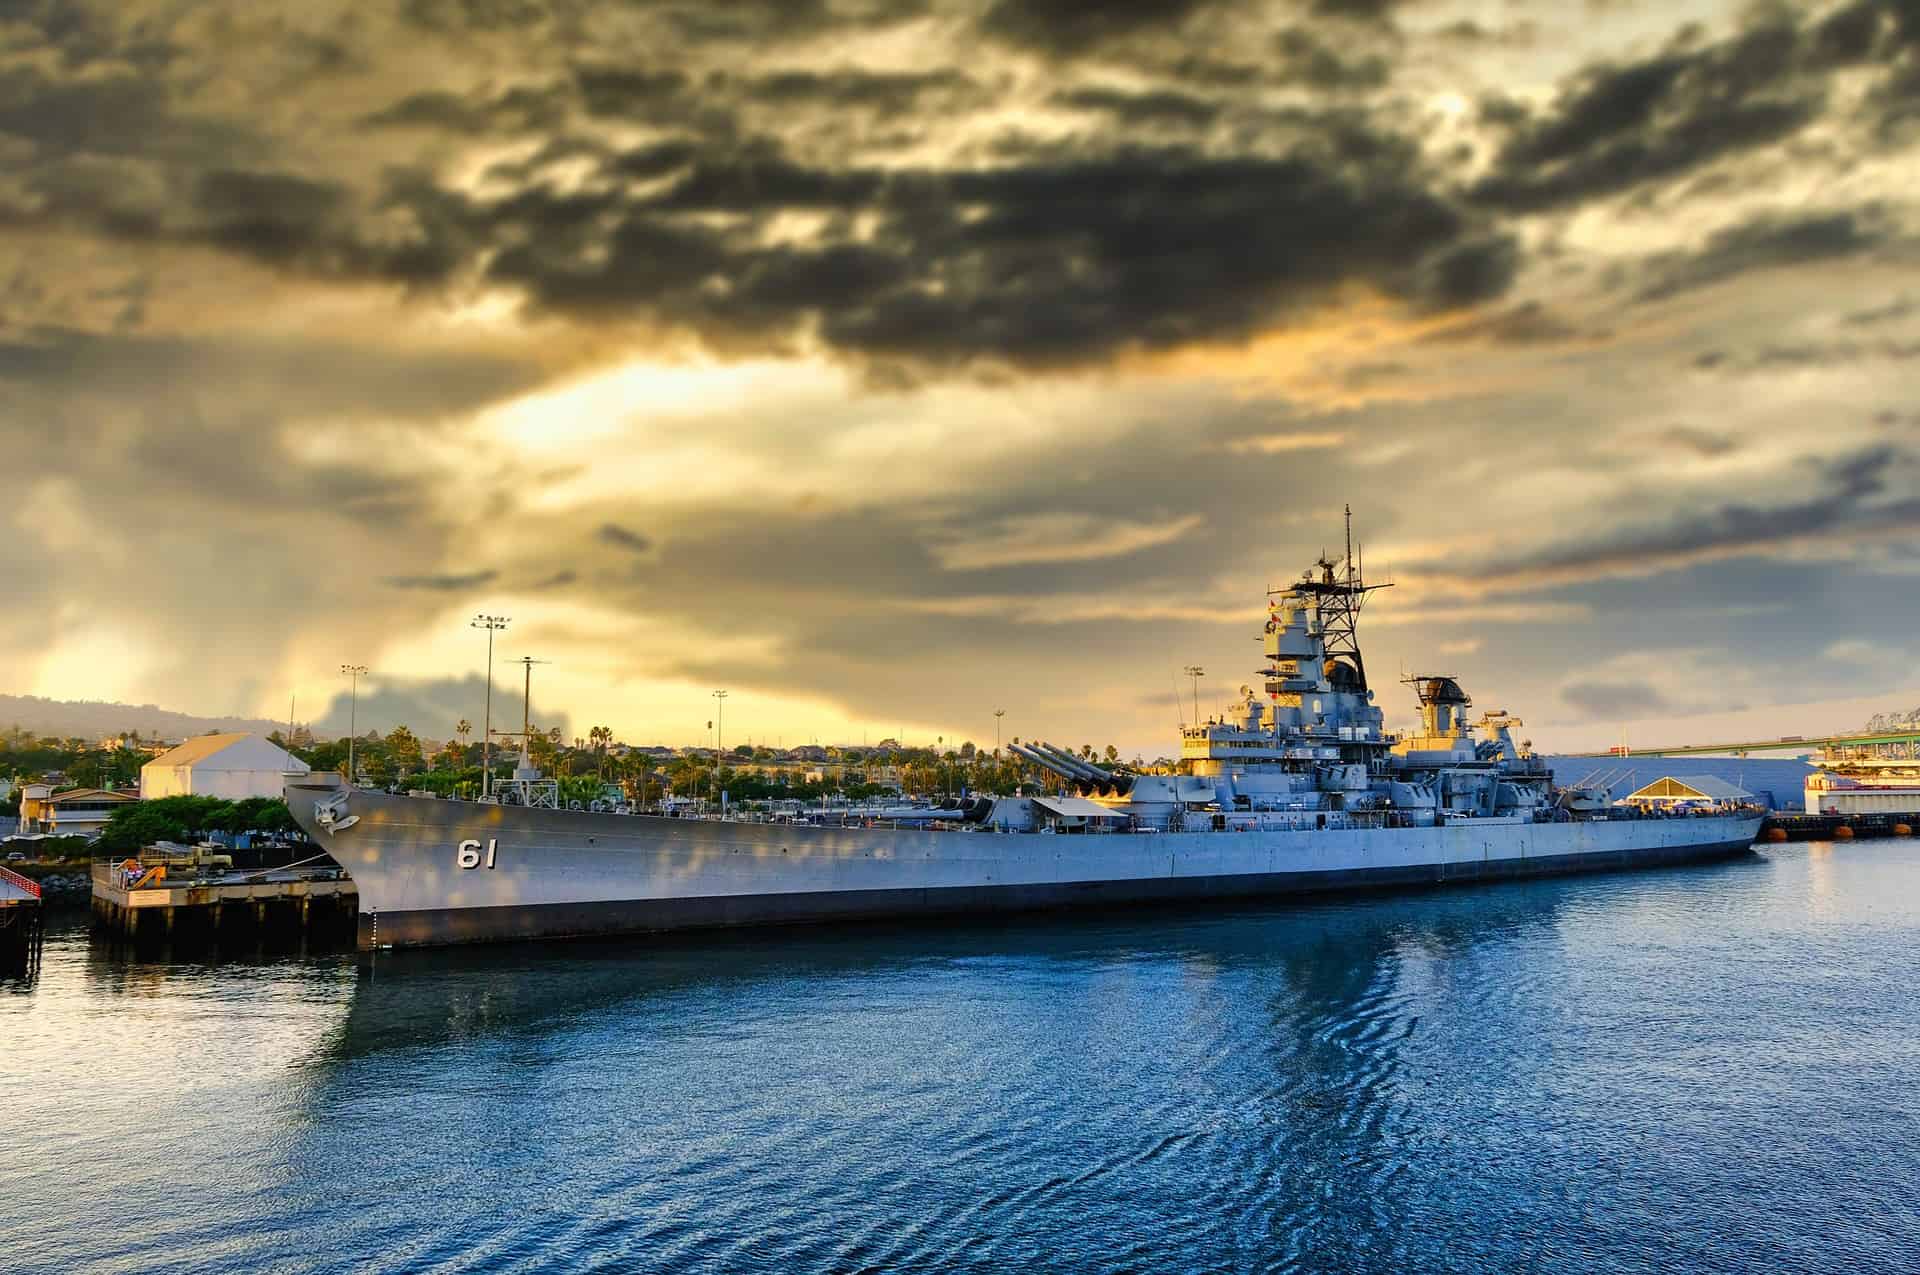 Sunset at the USS Iowa in Los Angeles, USA.